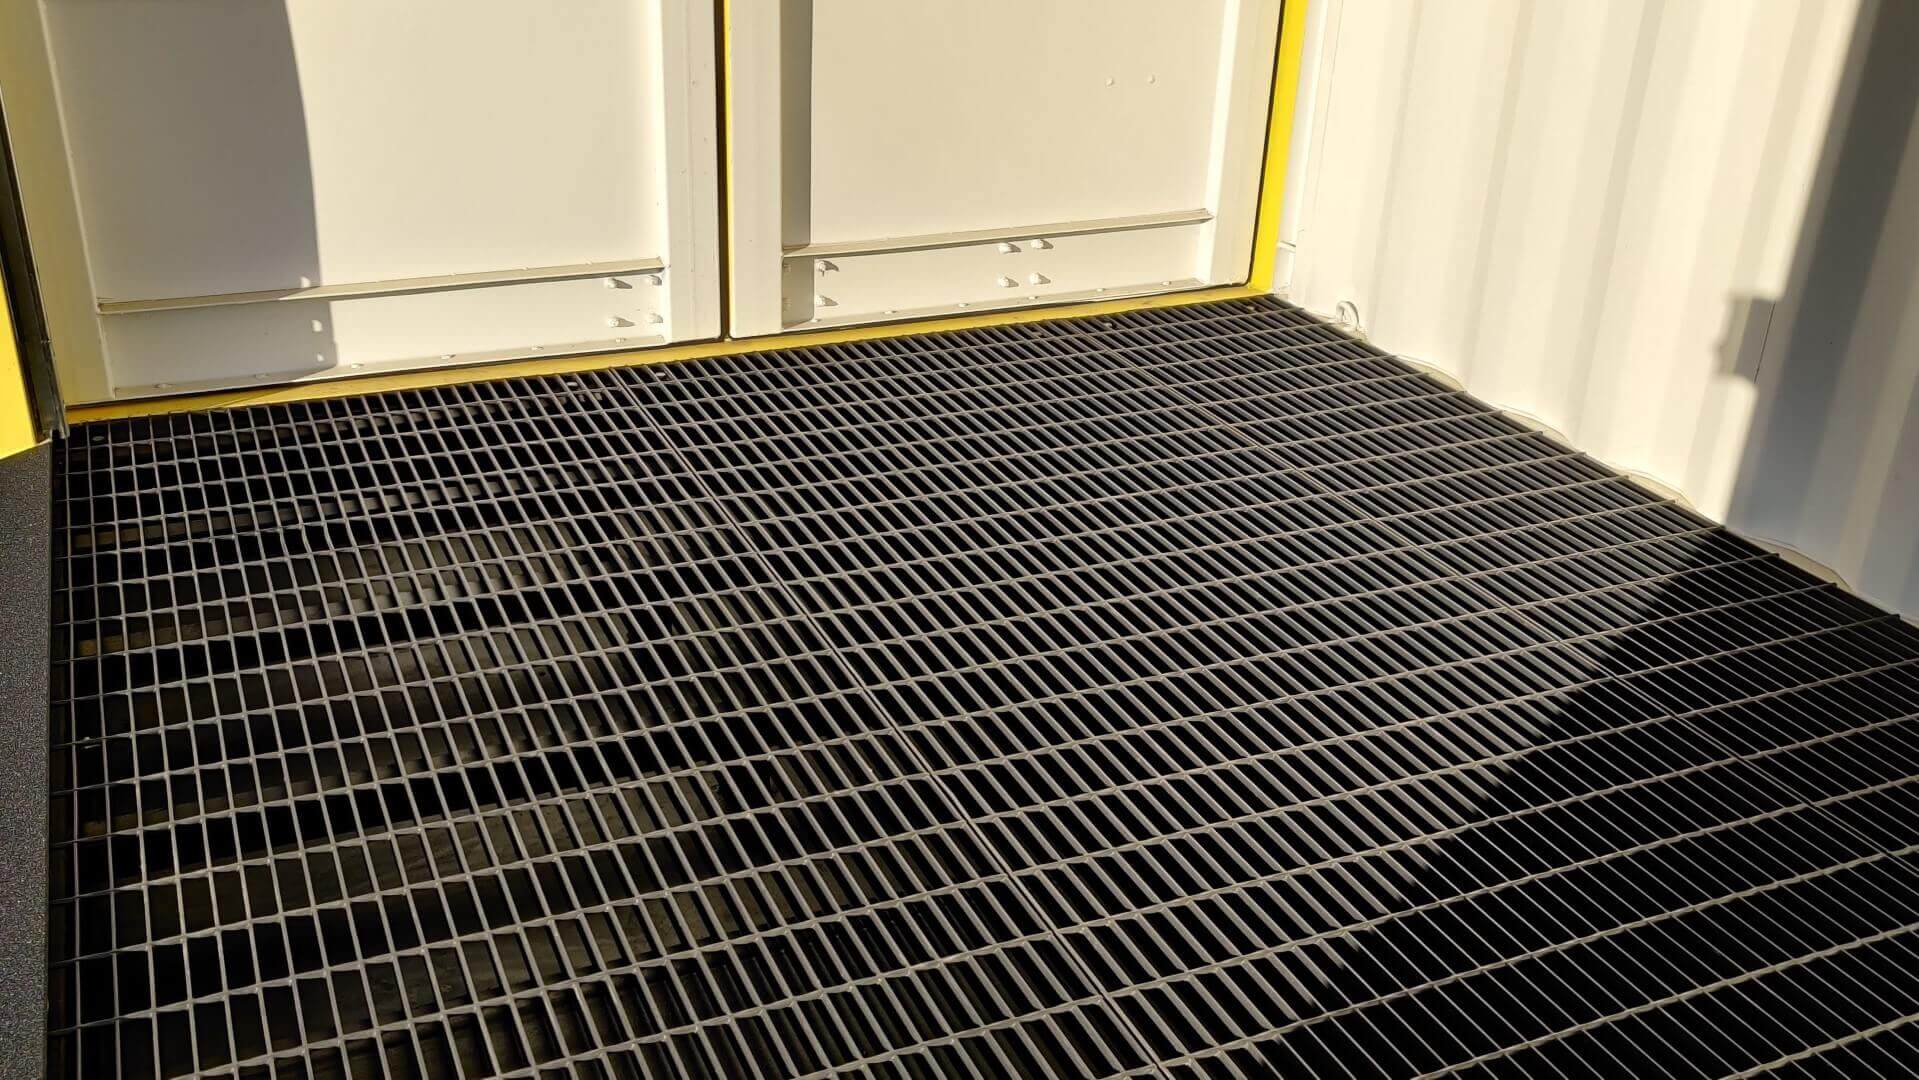 Steel bar grate flooring with containment tray